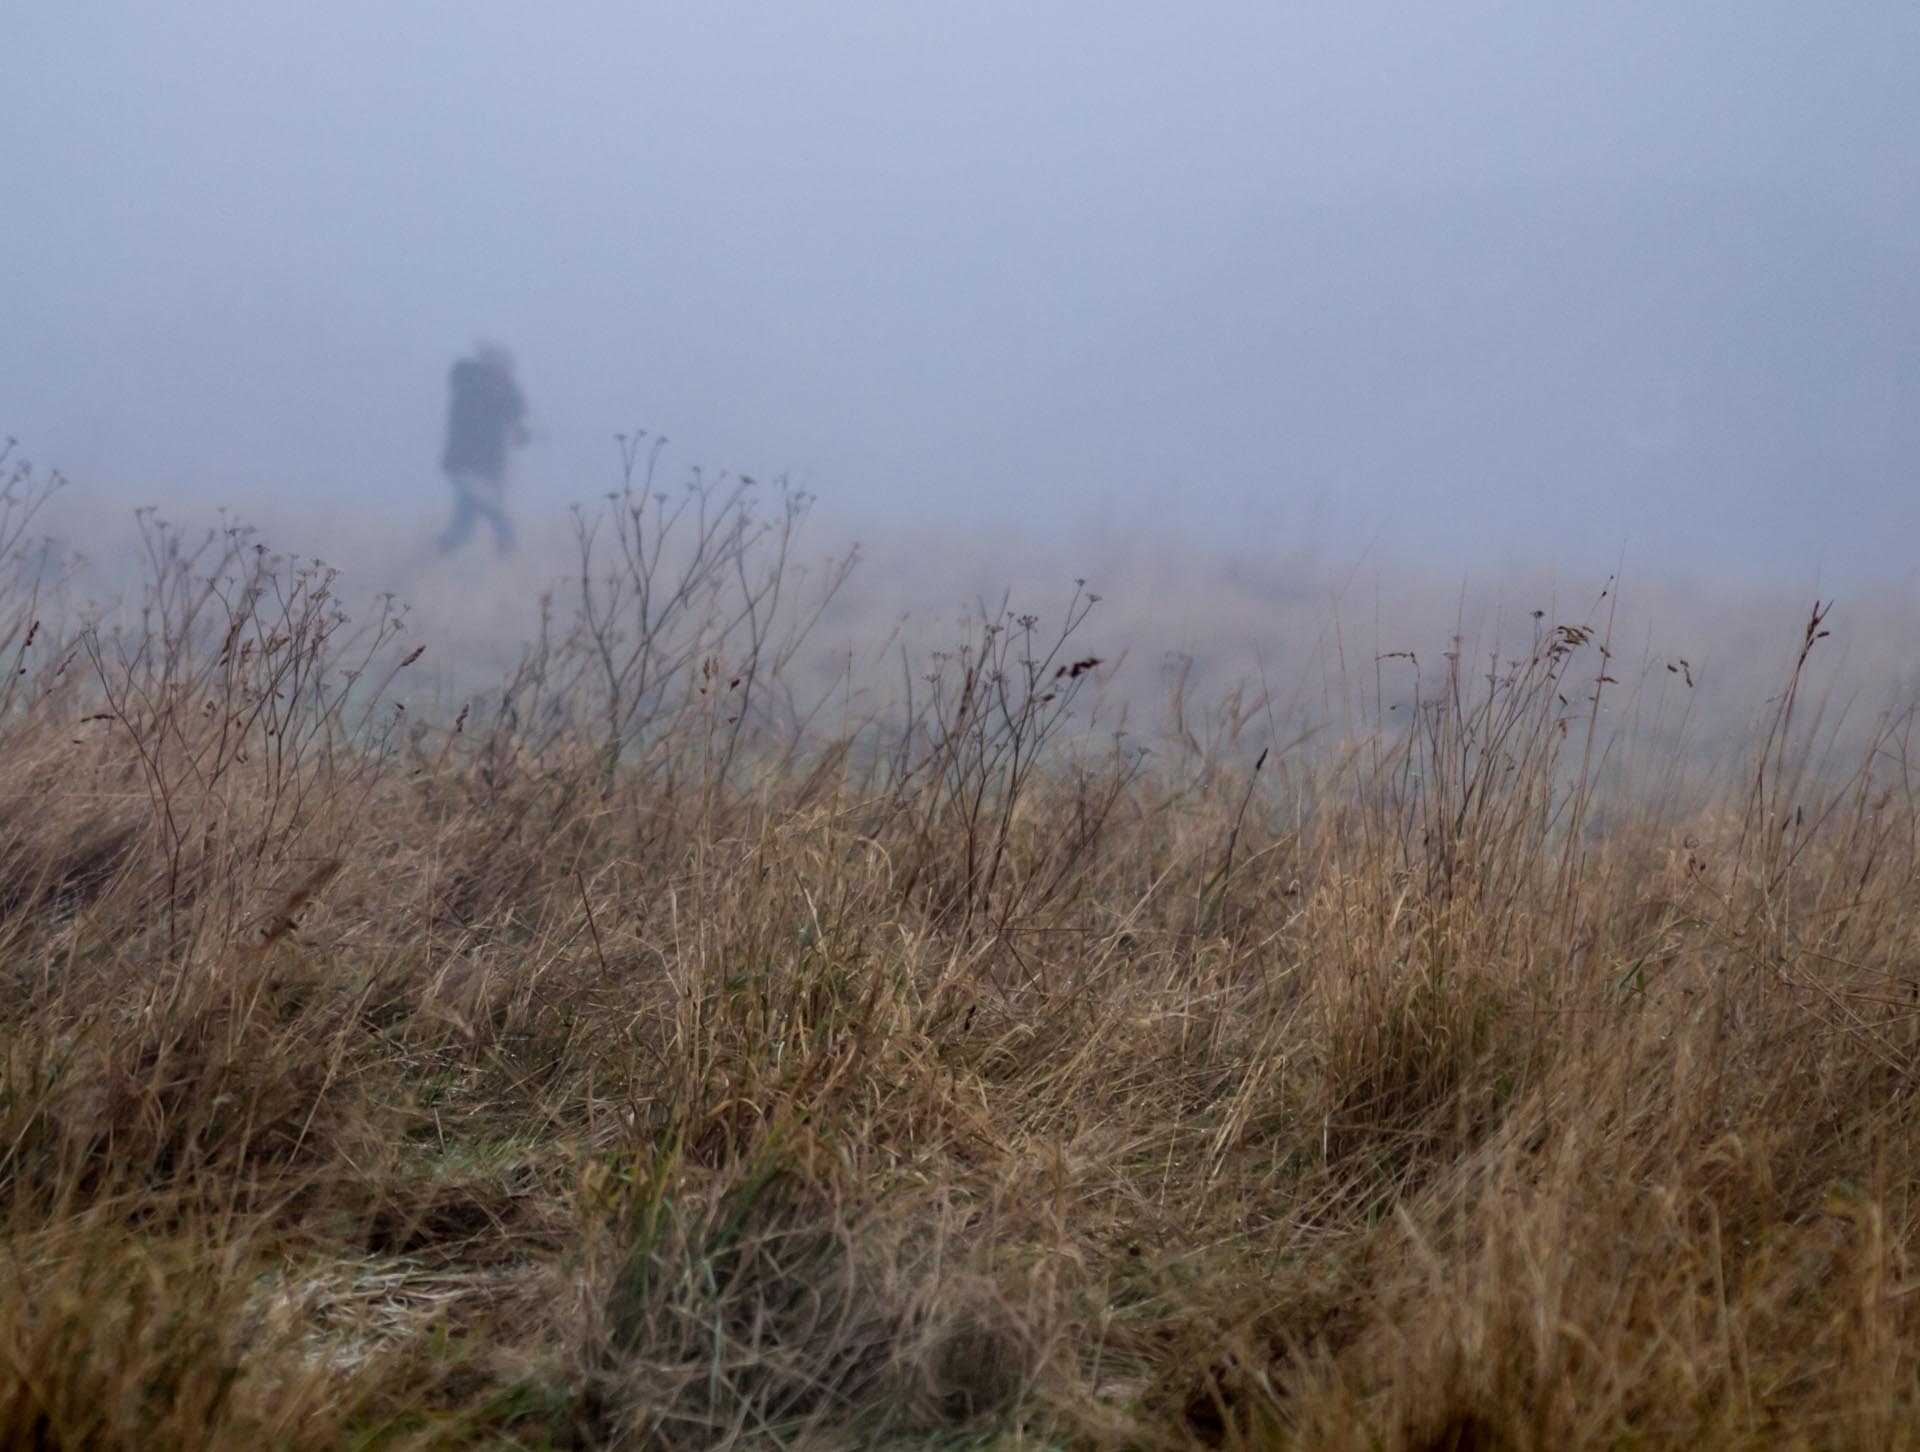 saftey in the fog - keeping safe when out alone